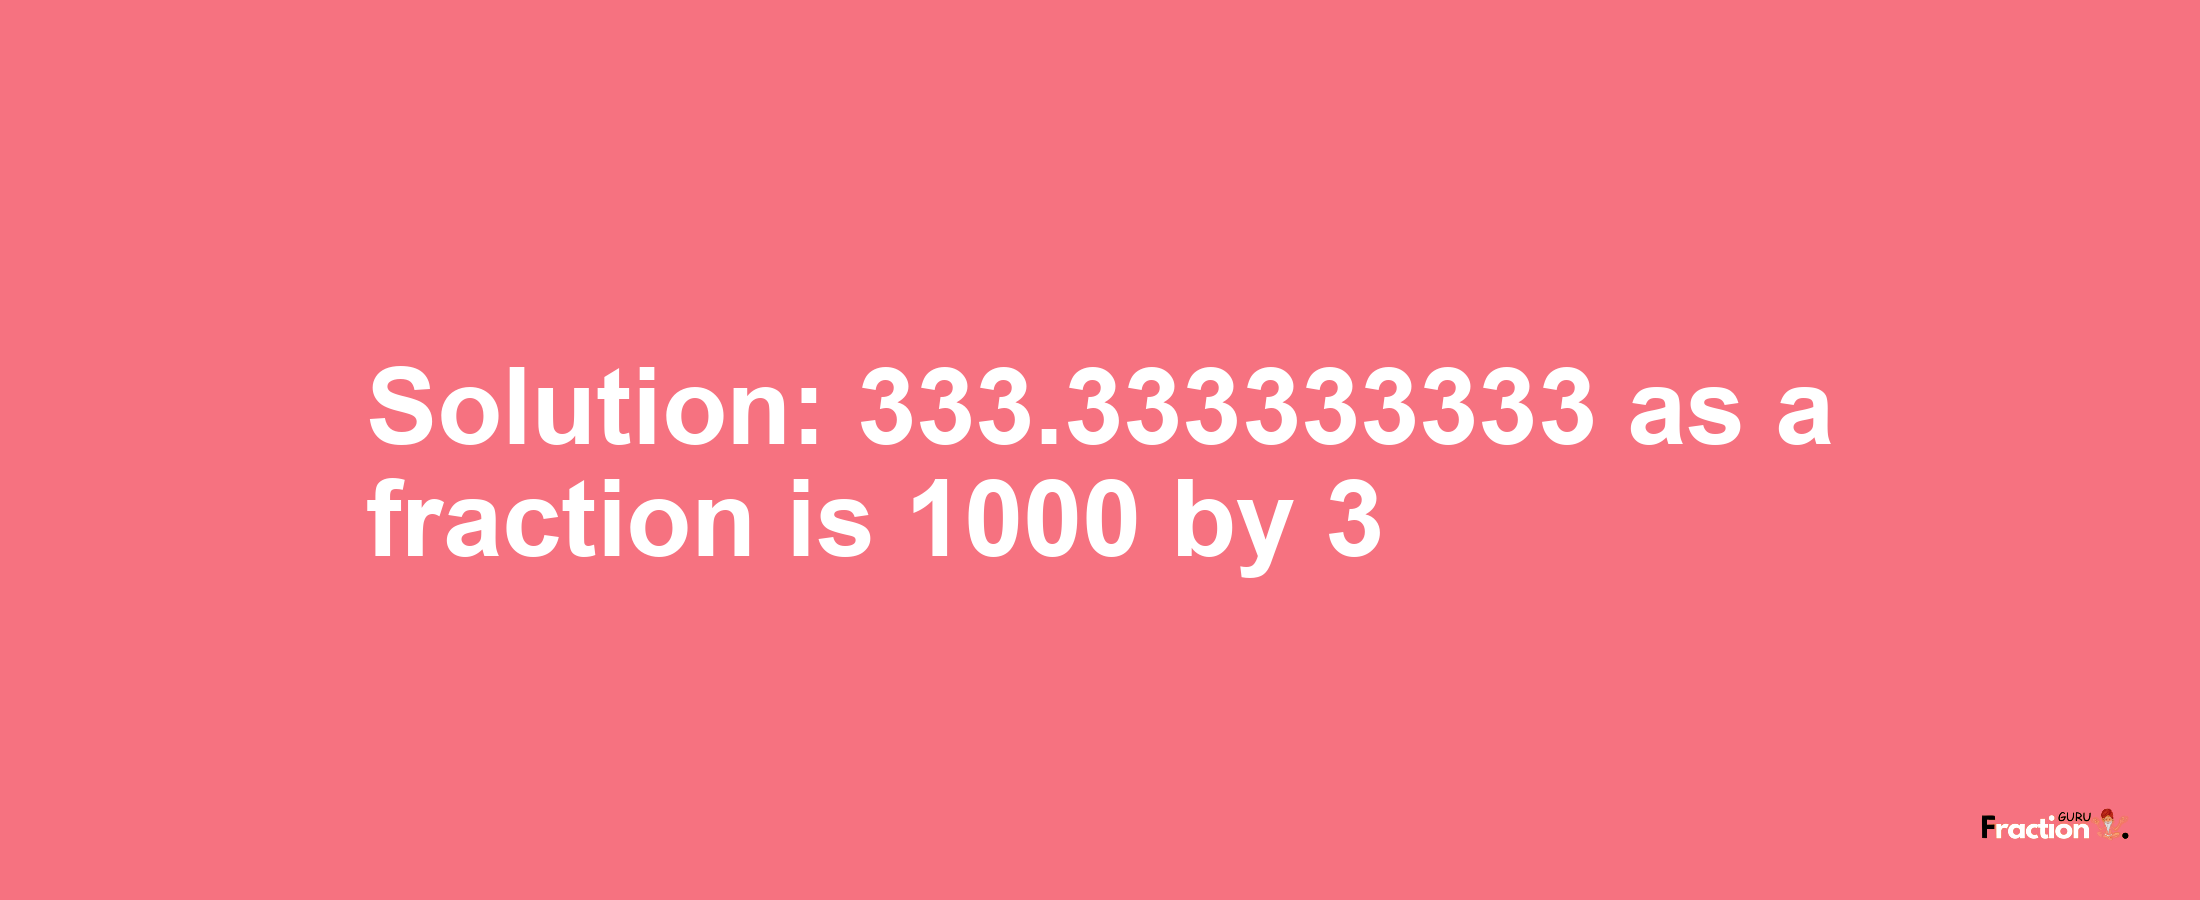 Solution:333.333333333 as a fraction is 1000/3